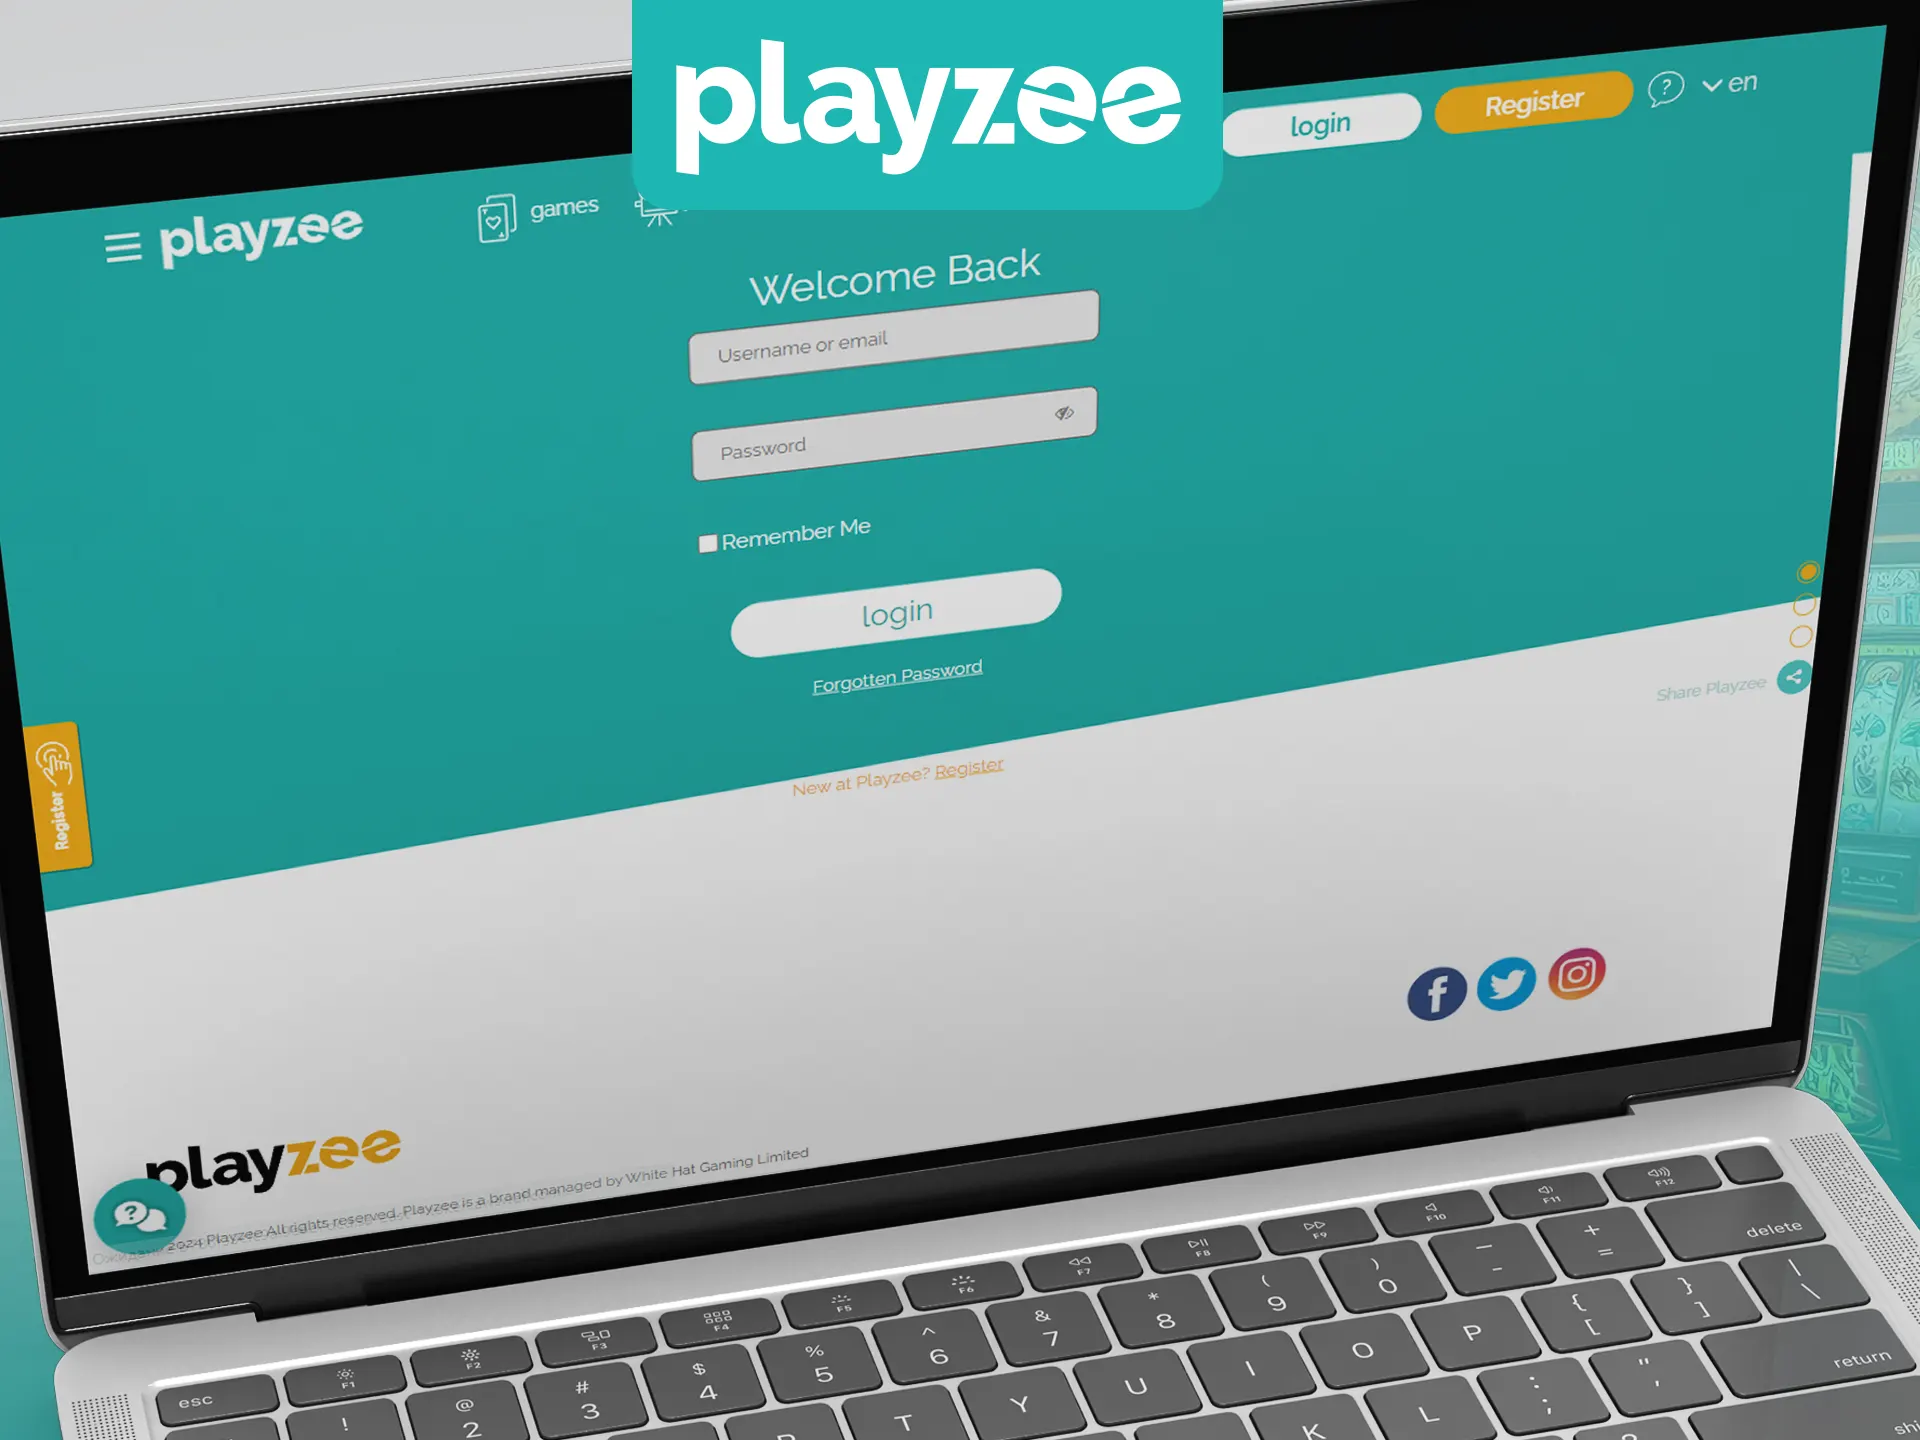 Enter your email and password to log in to Playzee Casino.